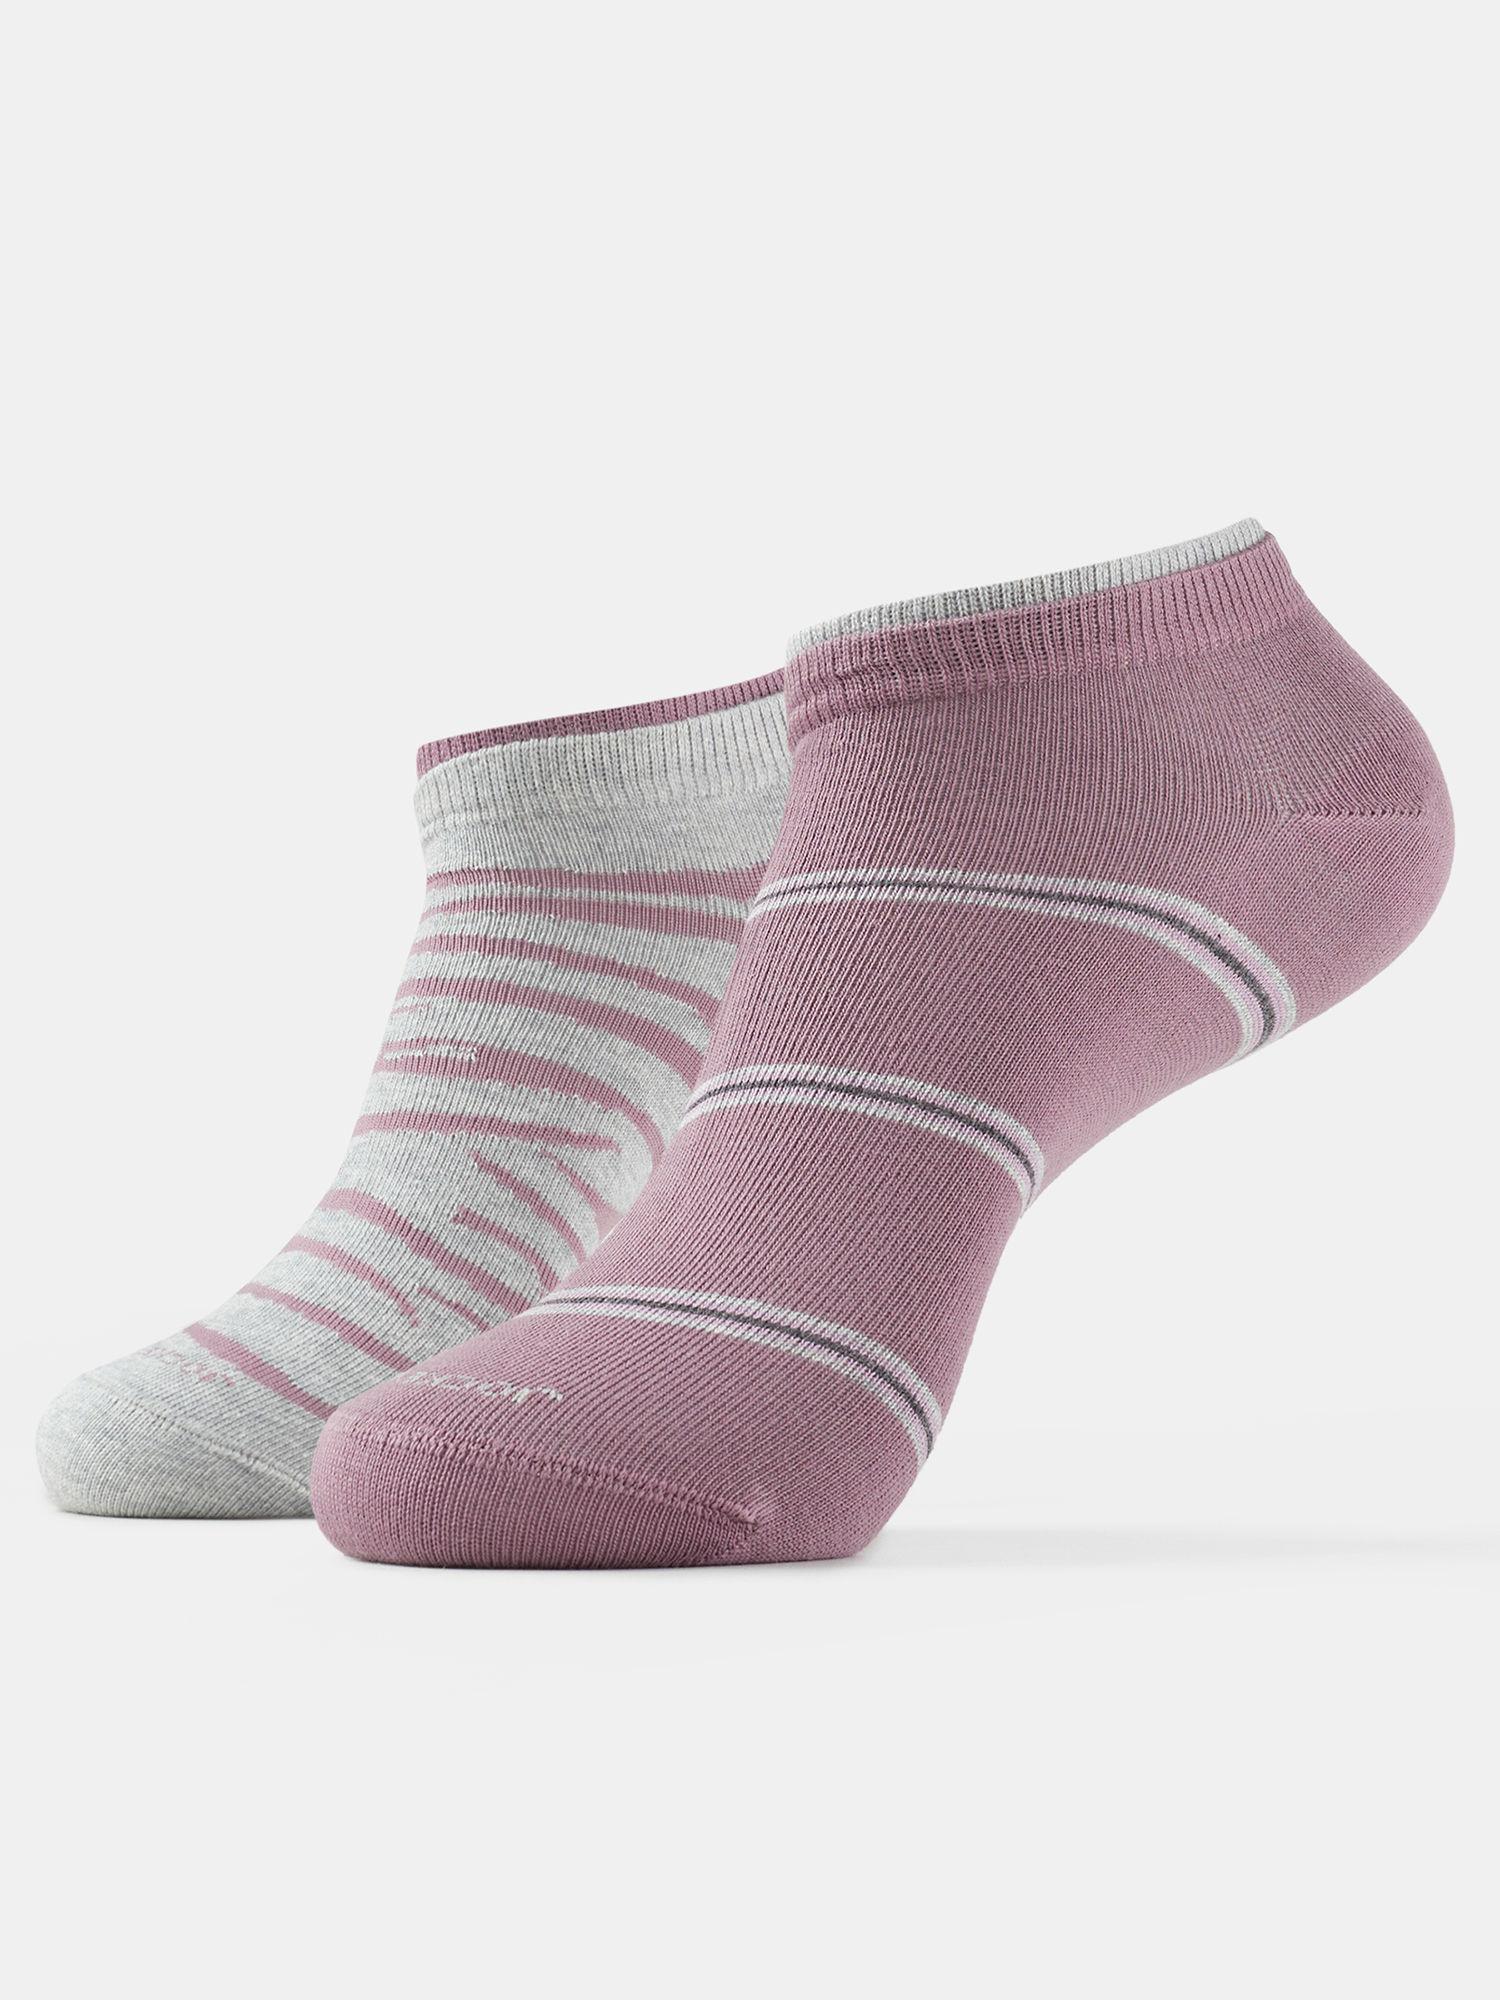 7480 women compact cotton low show socks - grey melange and grapeade (pack of 2)